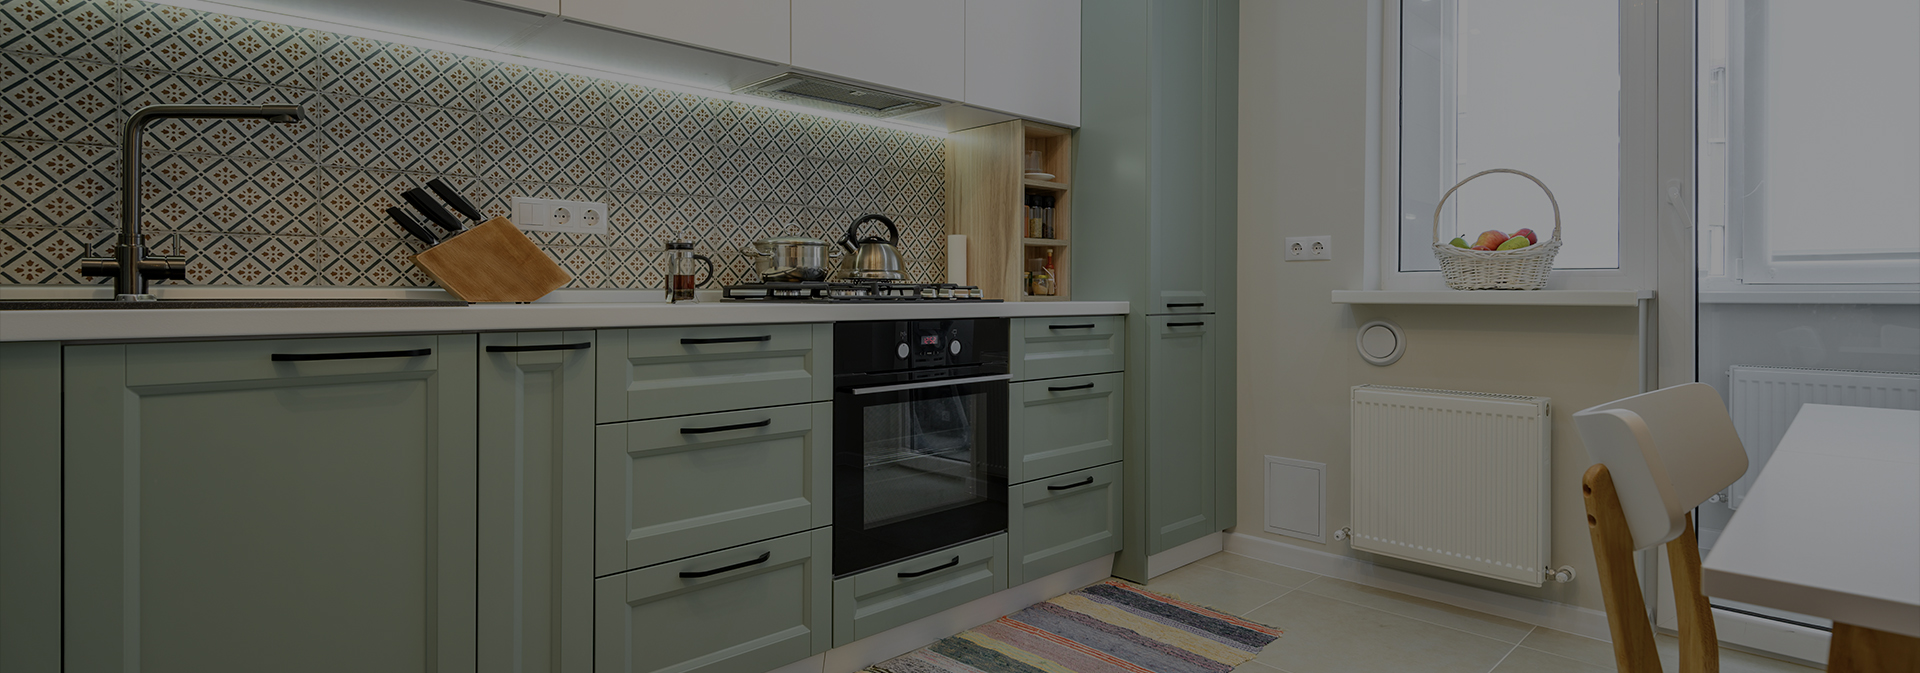 Green kitchen cabinet painting options at Urban Grace Cabinet Painting in Sycamore, Illinois